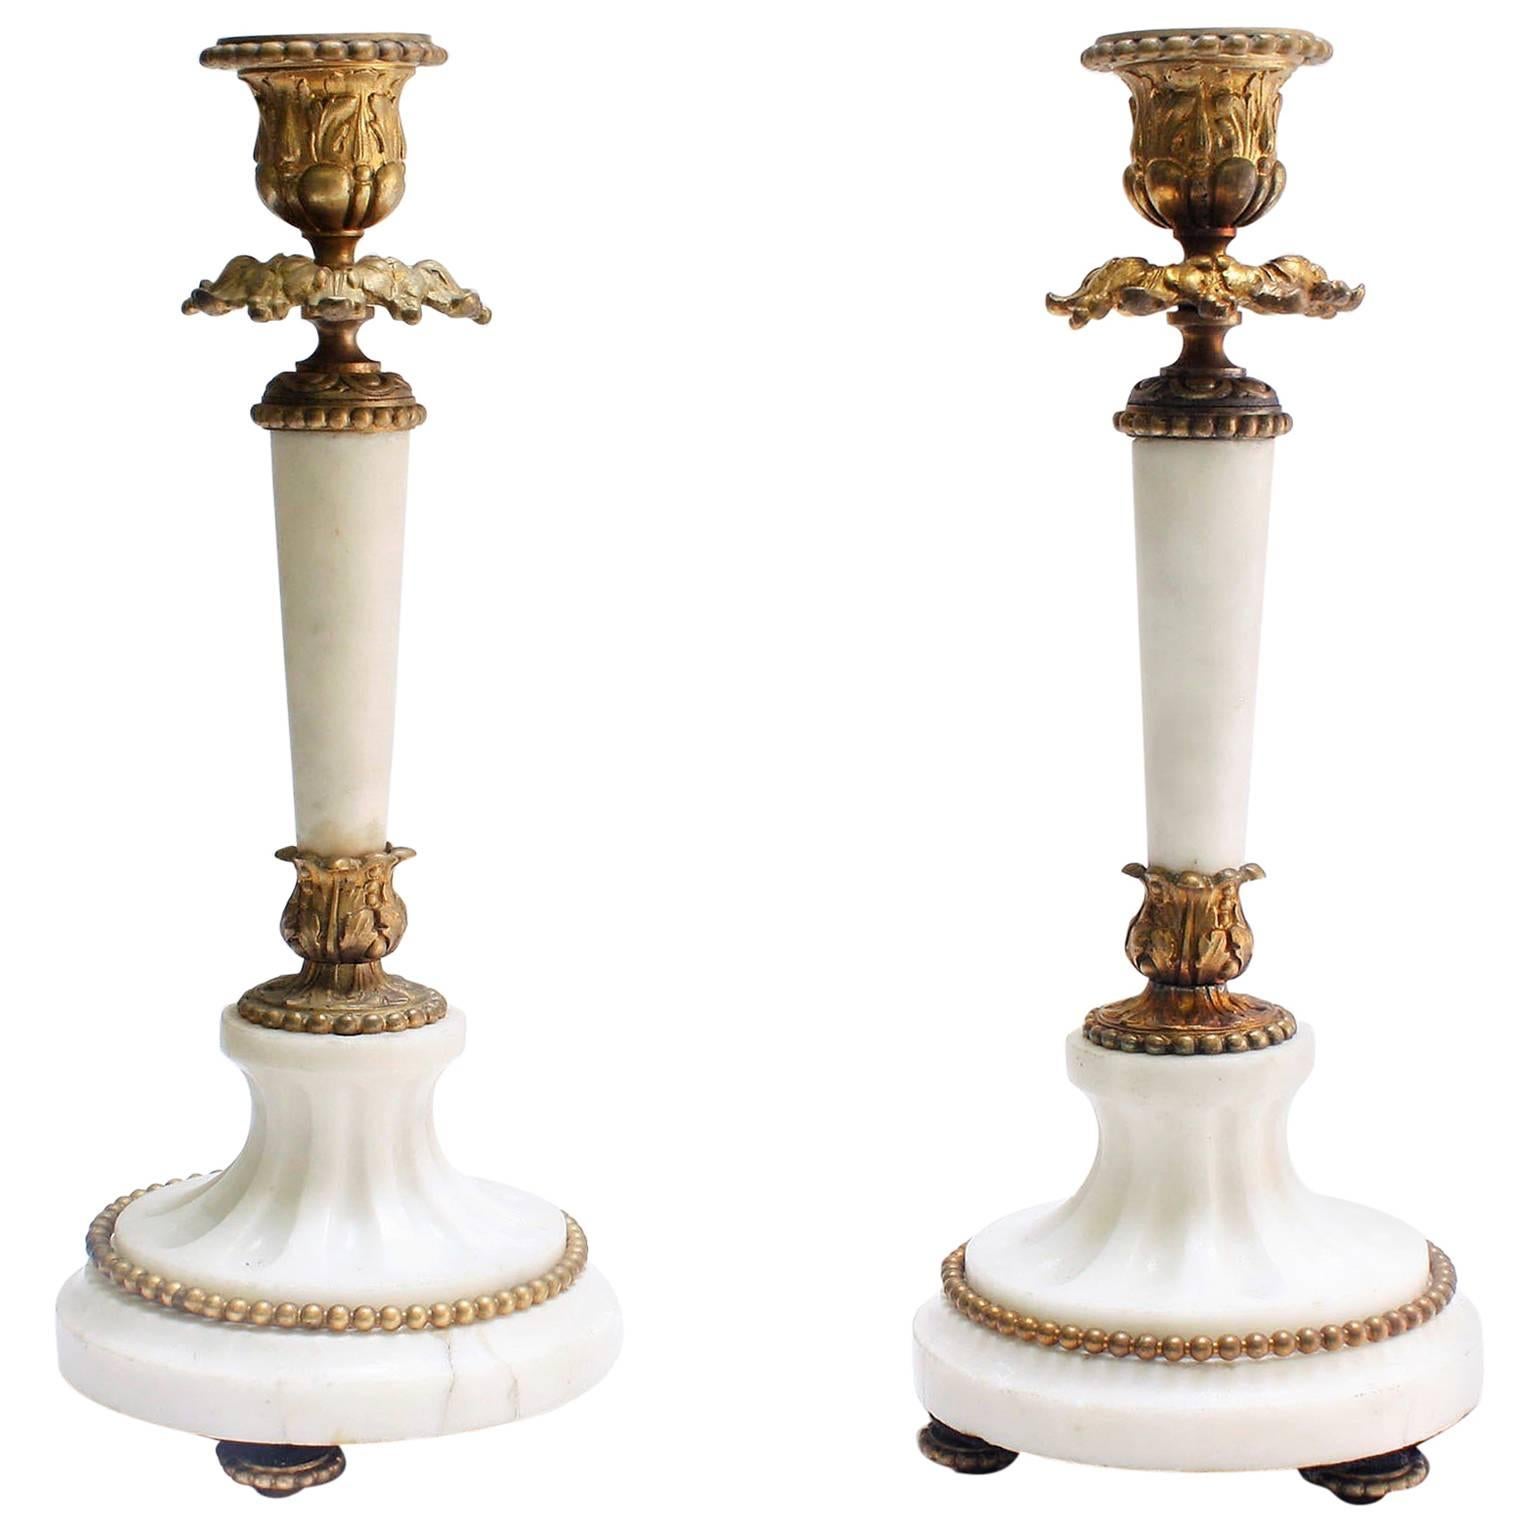 Pair of Antique French Louis XVI-Style Gilded Marble Candlesticks